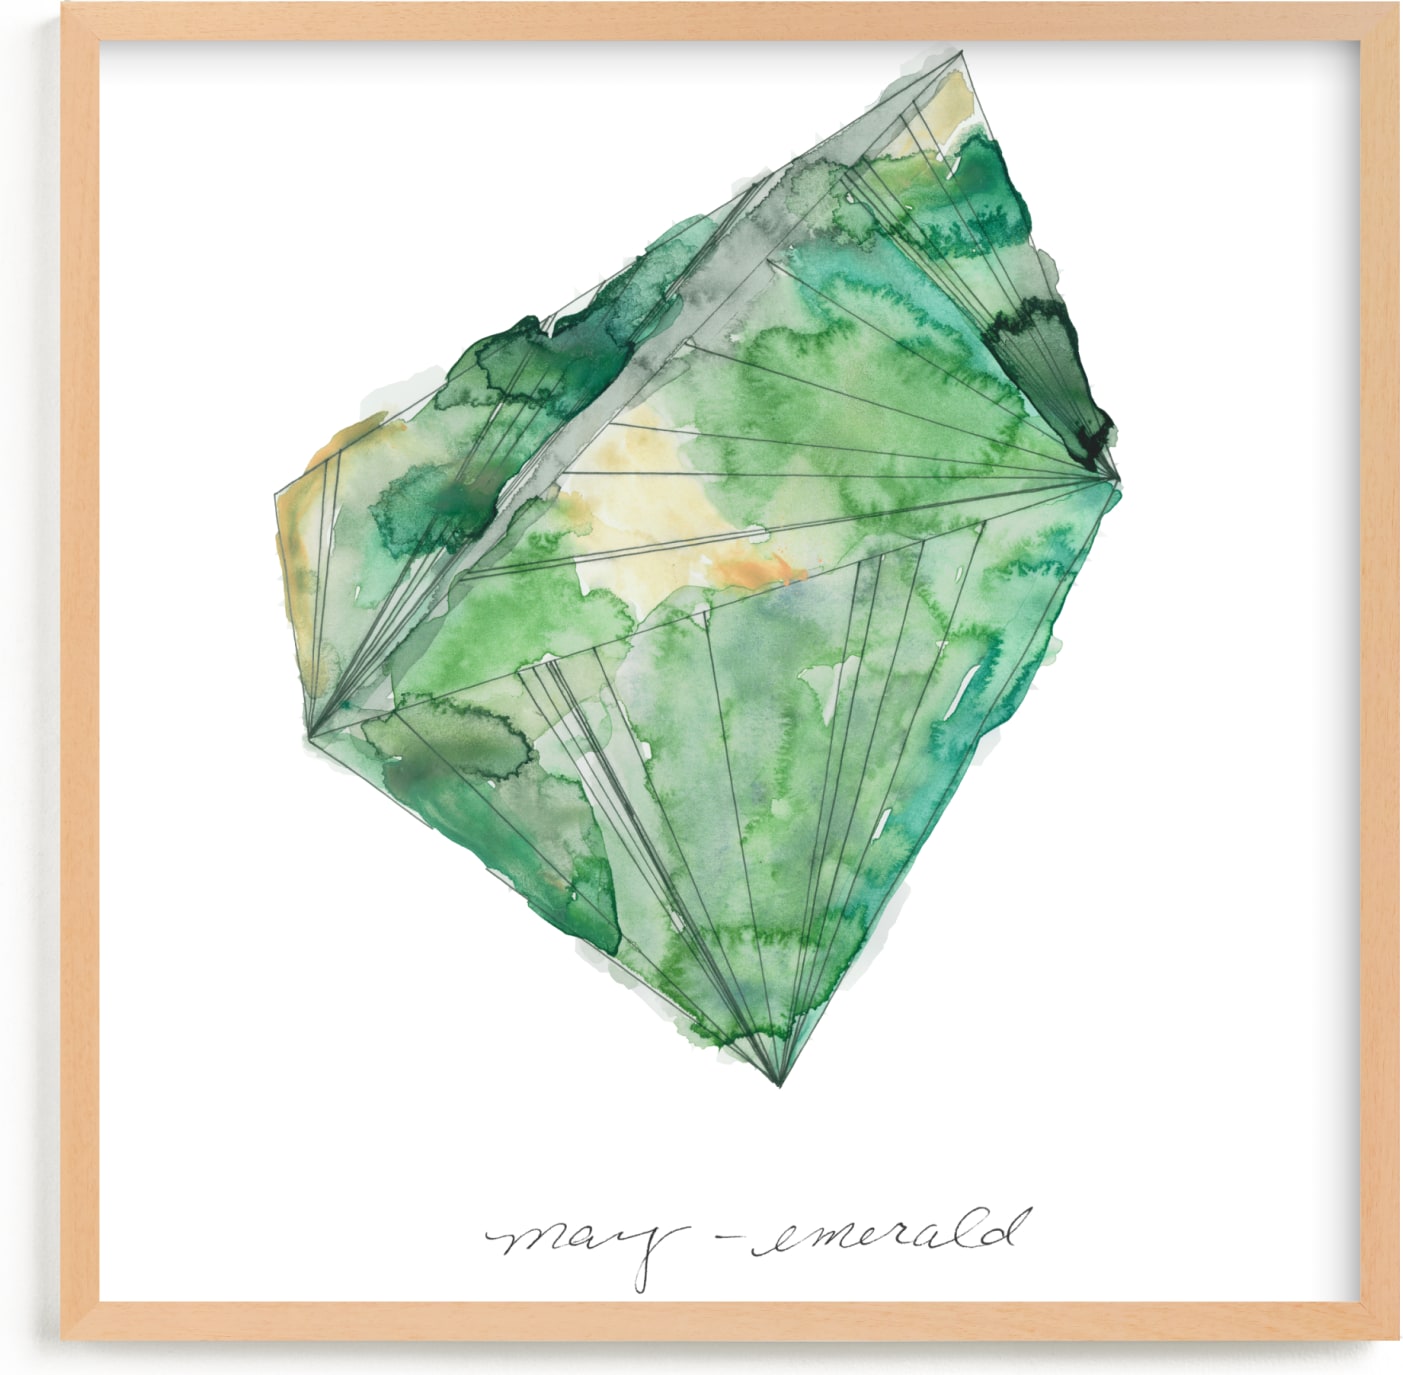 This is a green art by Naomi Ernest called May - Emerald.